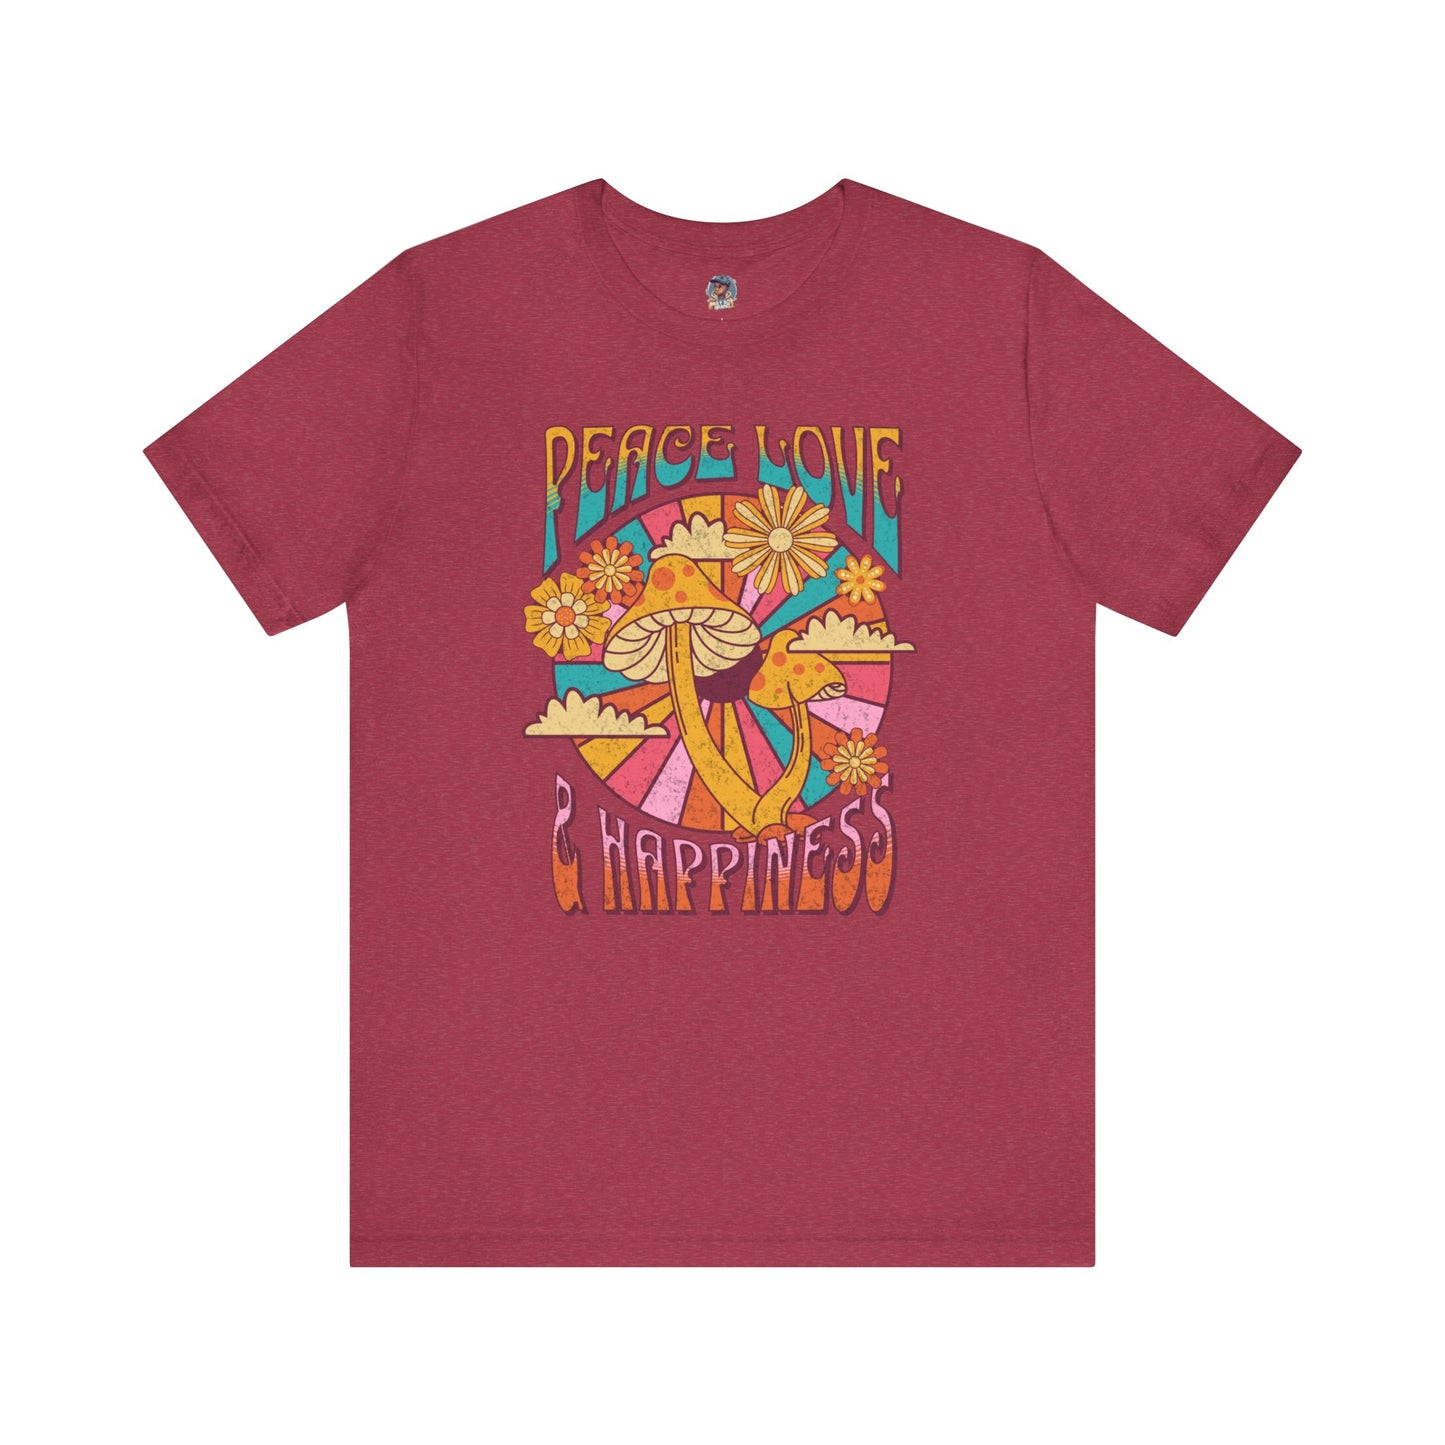 "Peace Love & Happiness T-shirt"